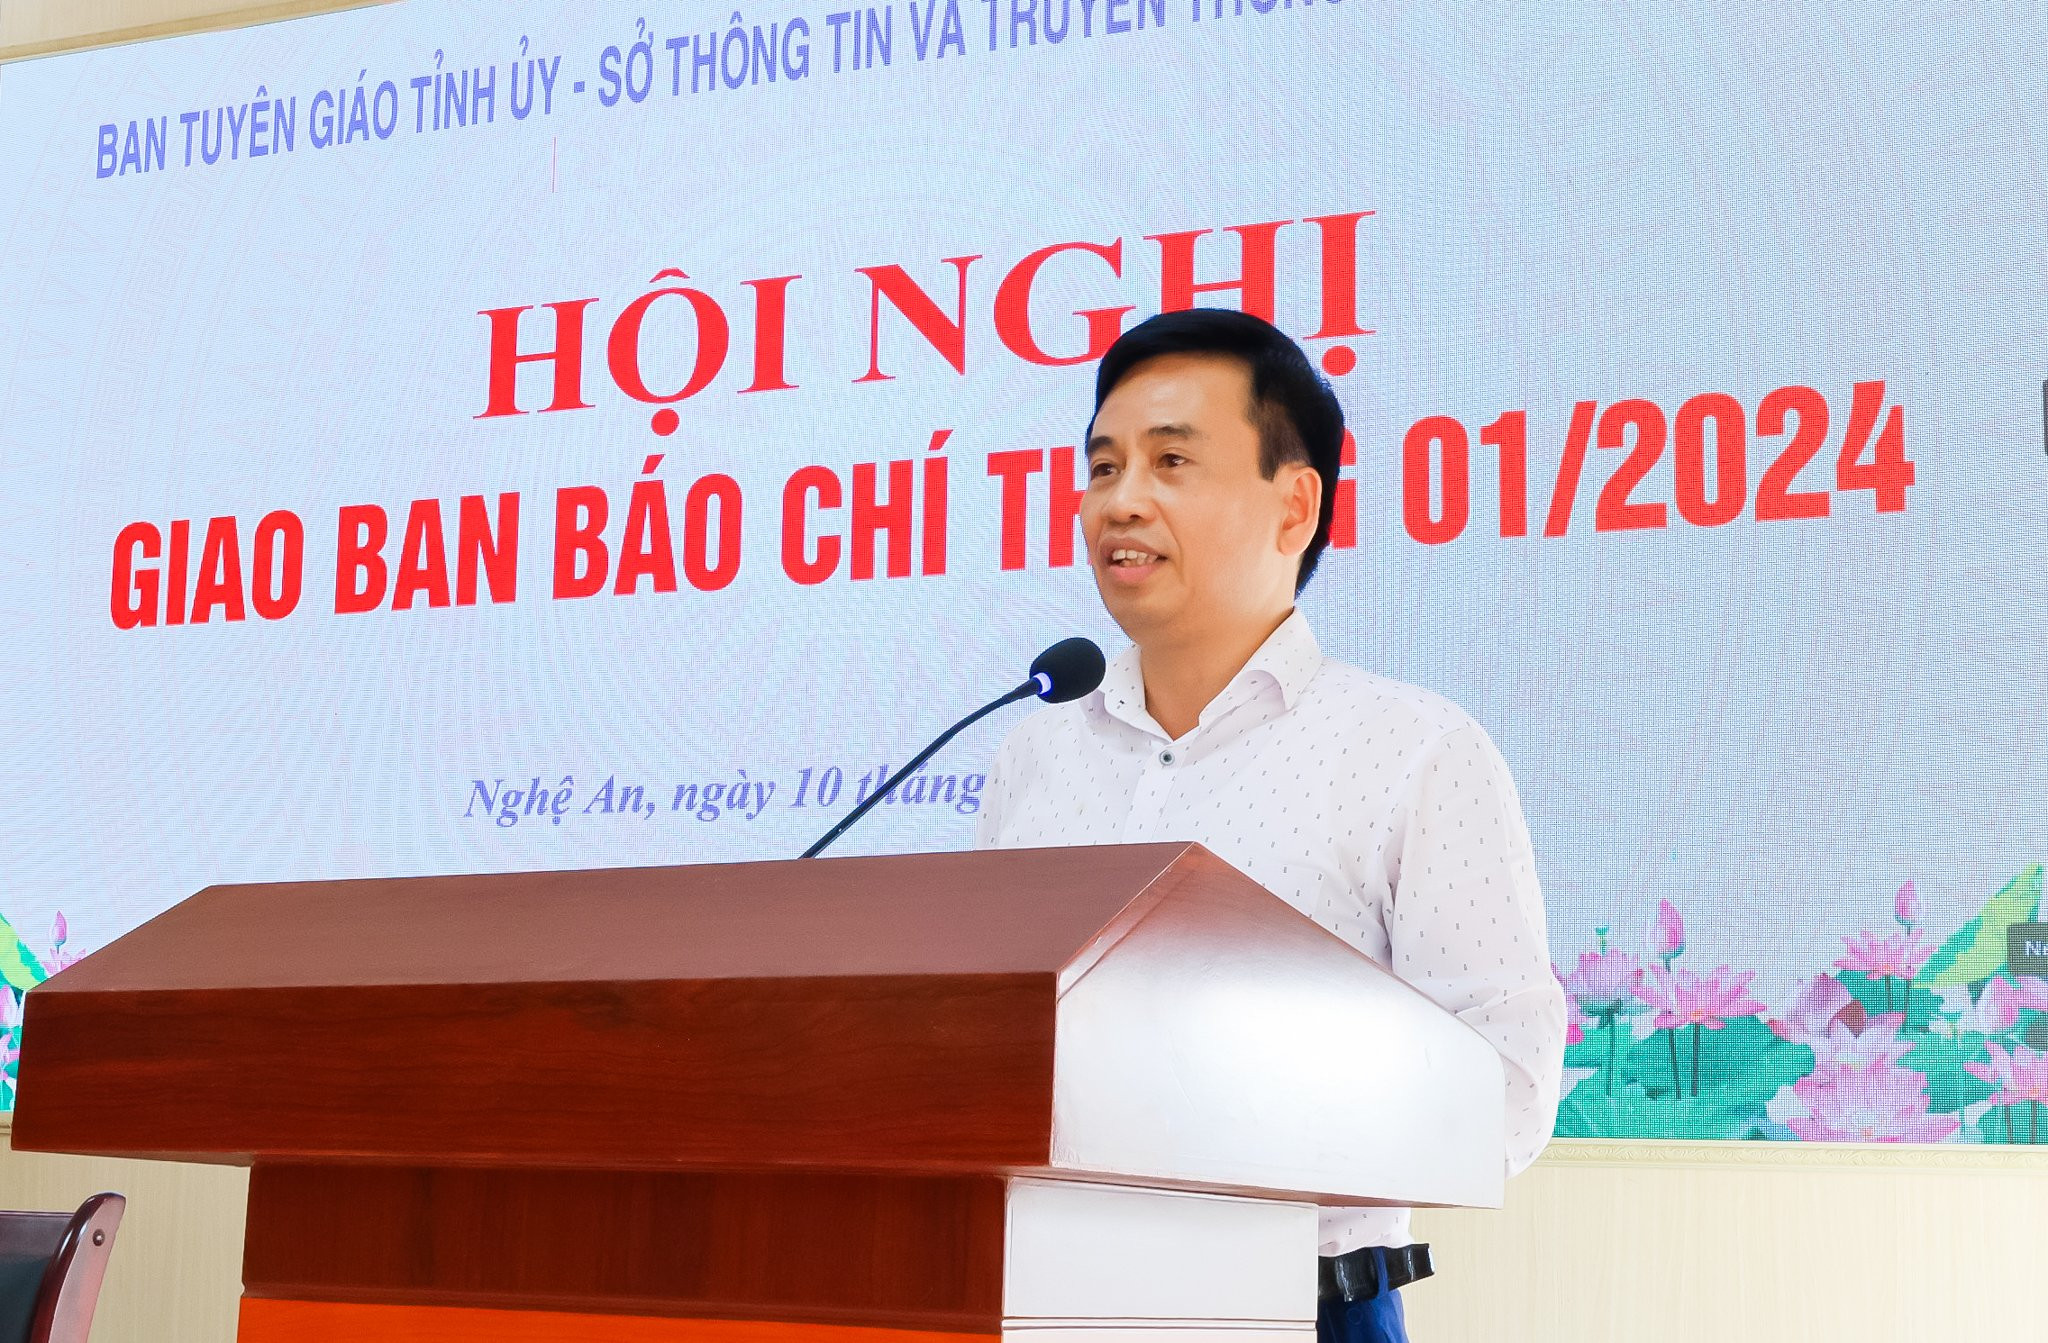 bna-a-hao-anh-thanh-le-9028.jpg